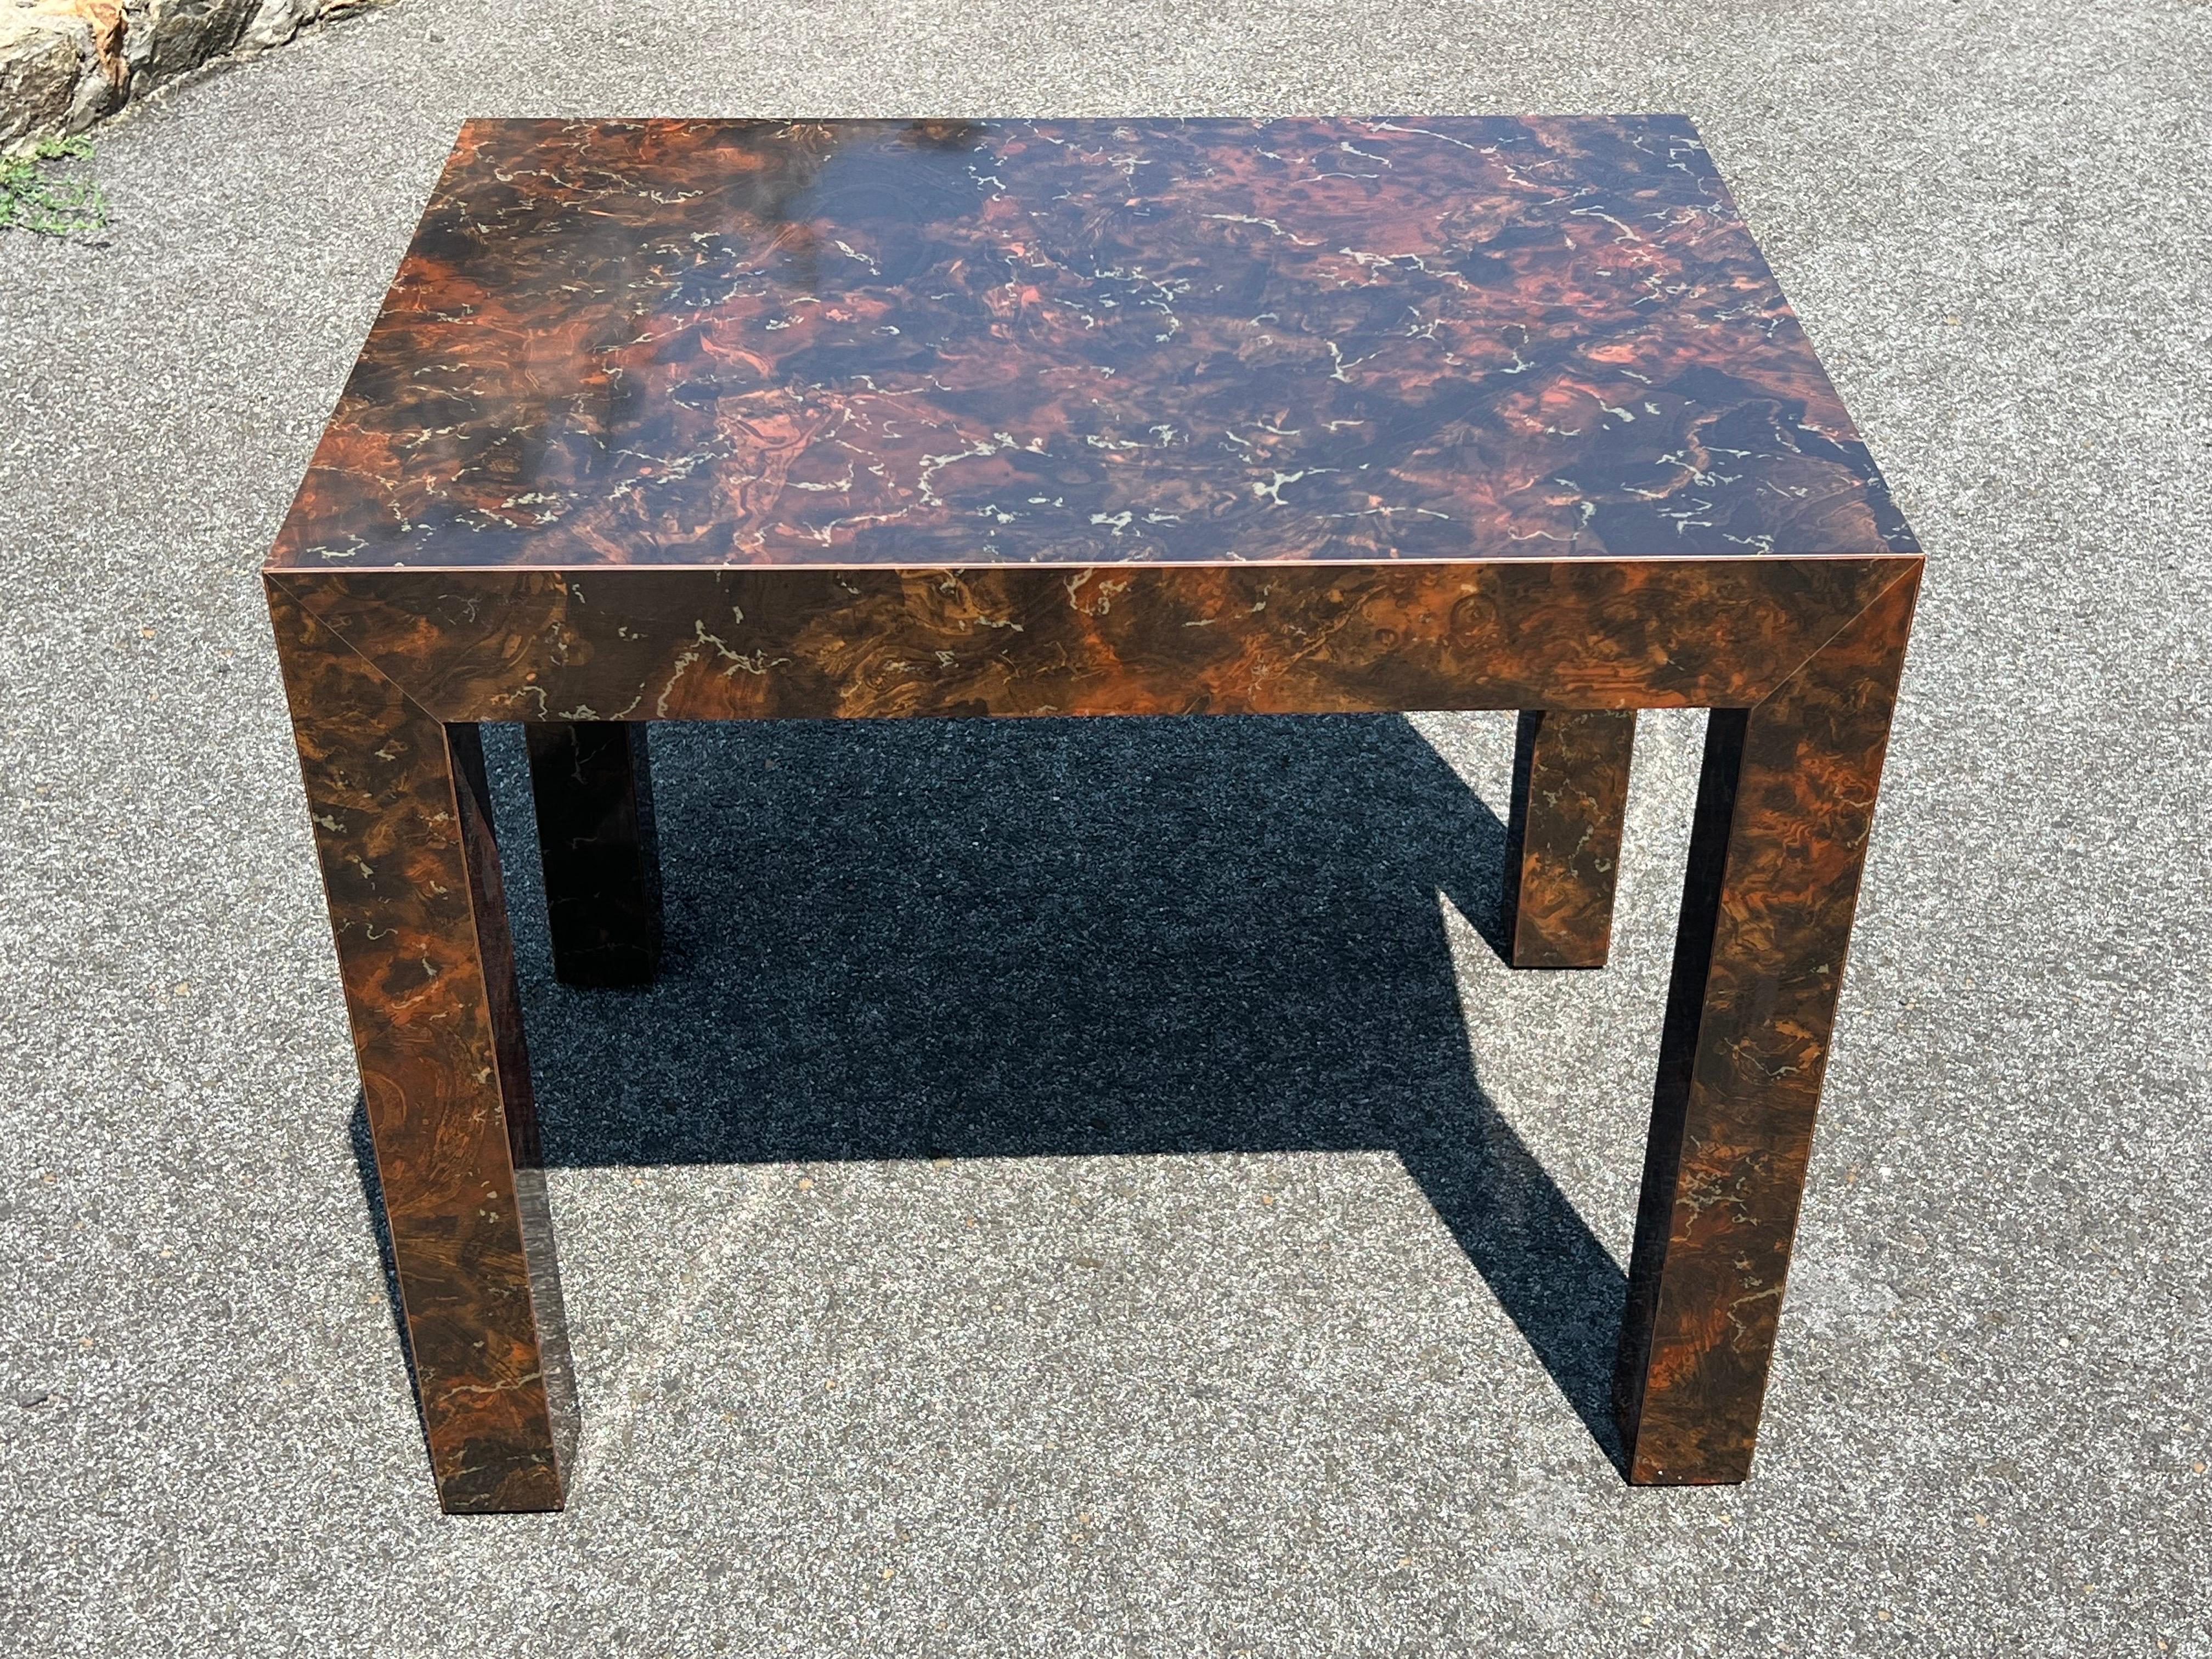 Post Modern Laminated Tortoiseshell Table. Rich deep brown earth tones with speckles of gold and orange and vein like bands of off white. Use aa an end table. We also have a matching sofa table, coffee table and larger end table.